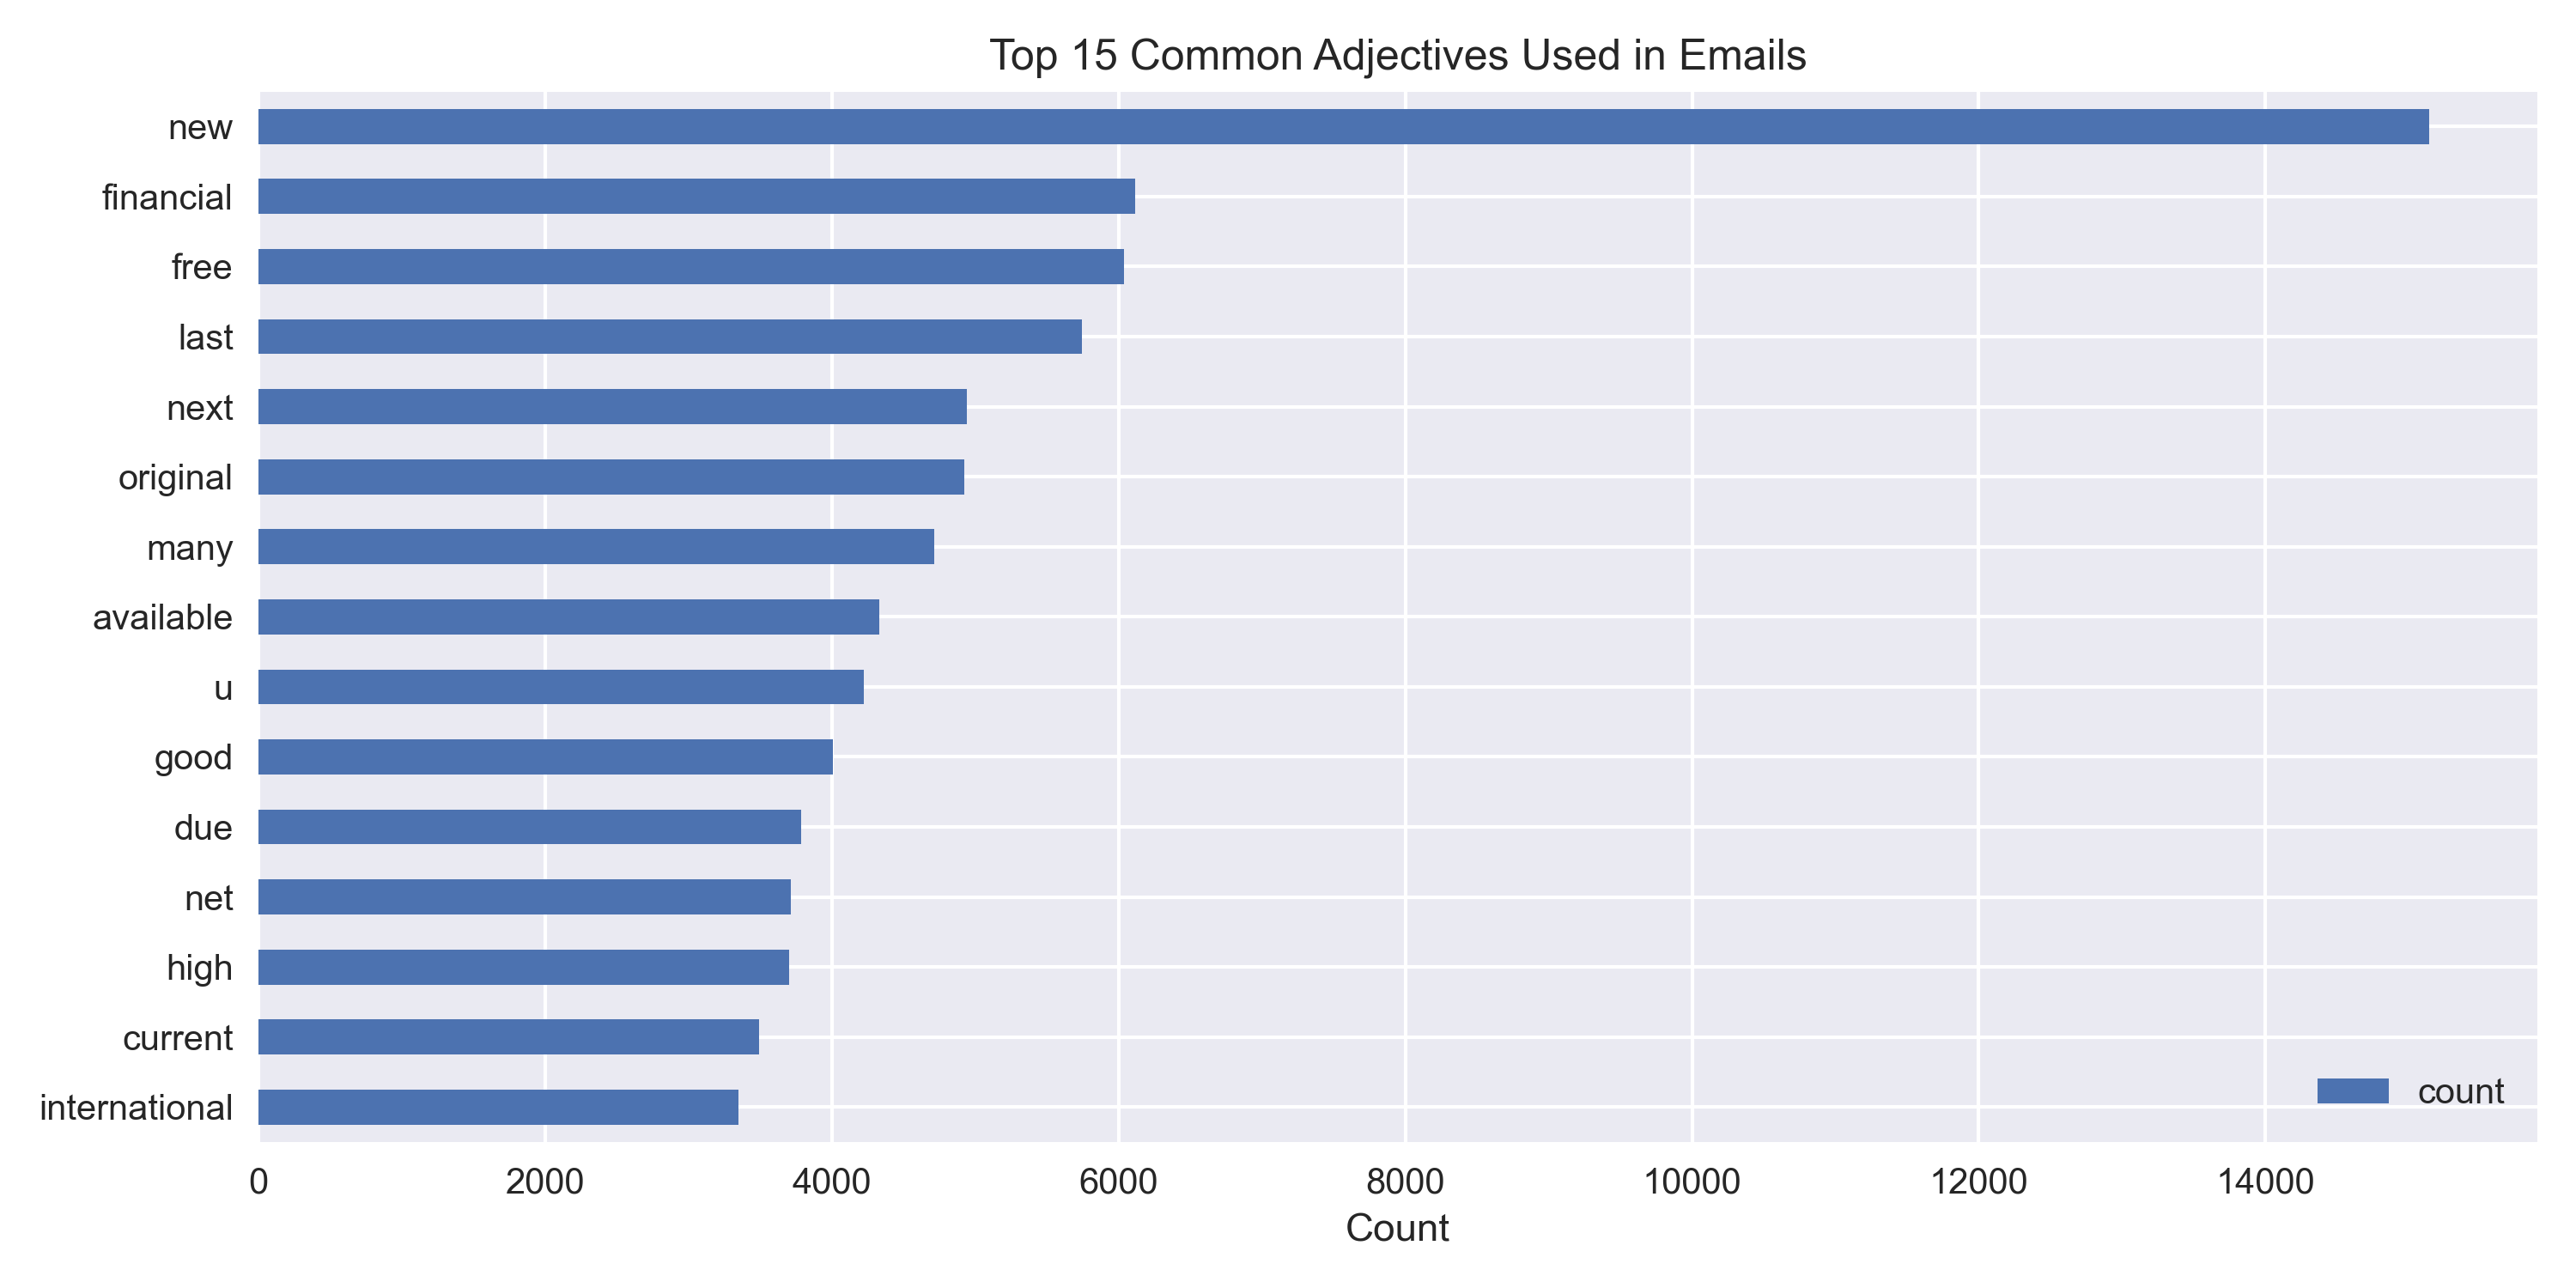 Top 15 Common Adjectives Used in Emails